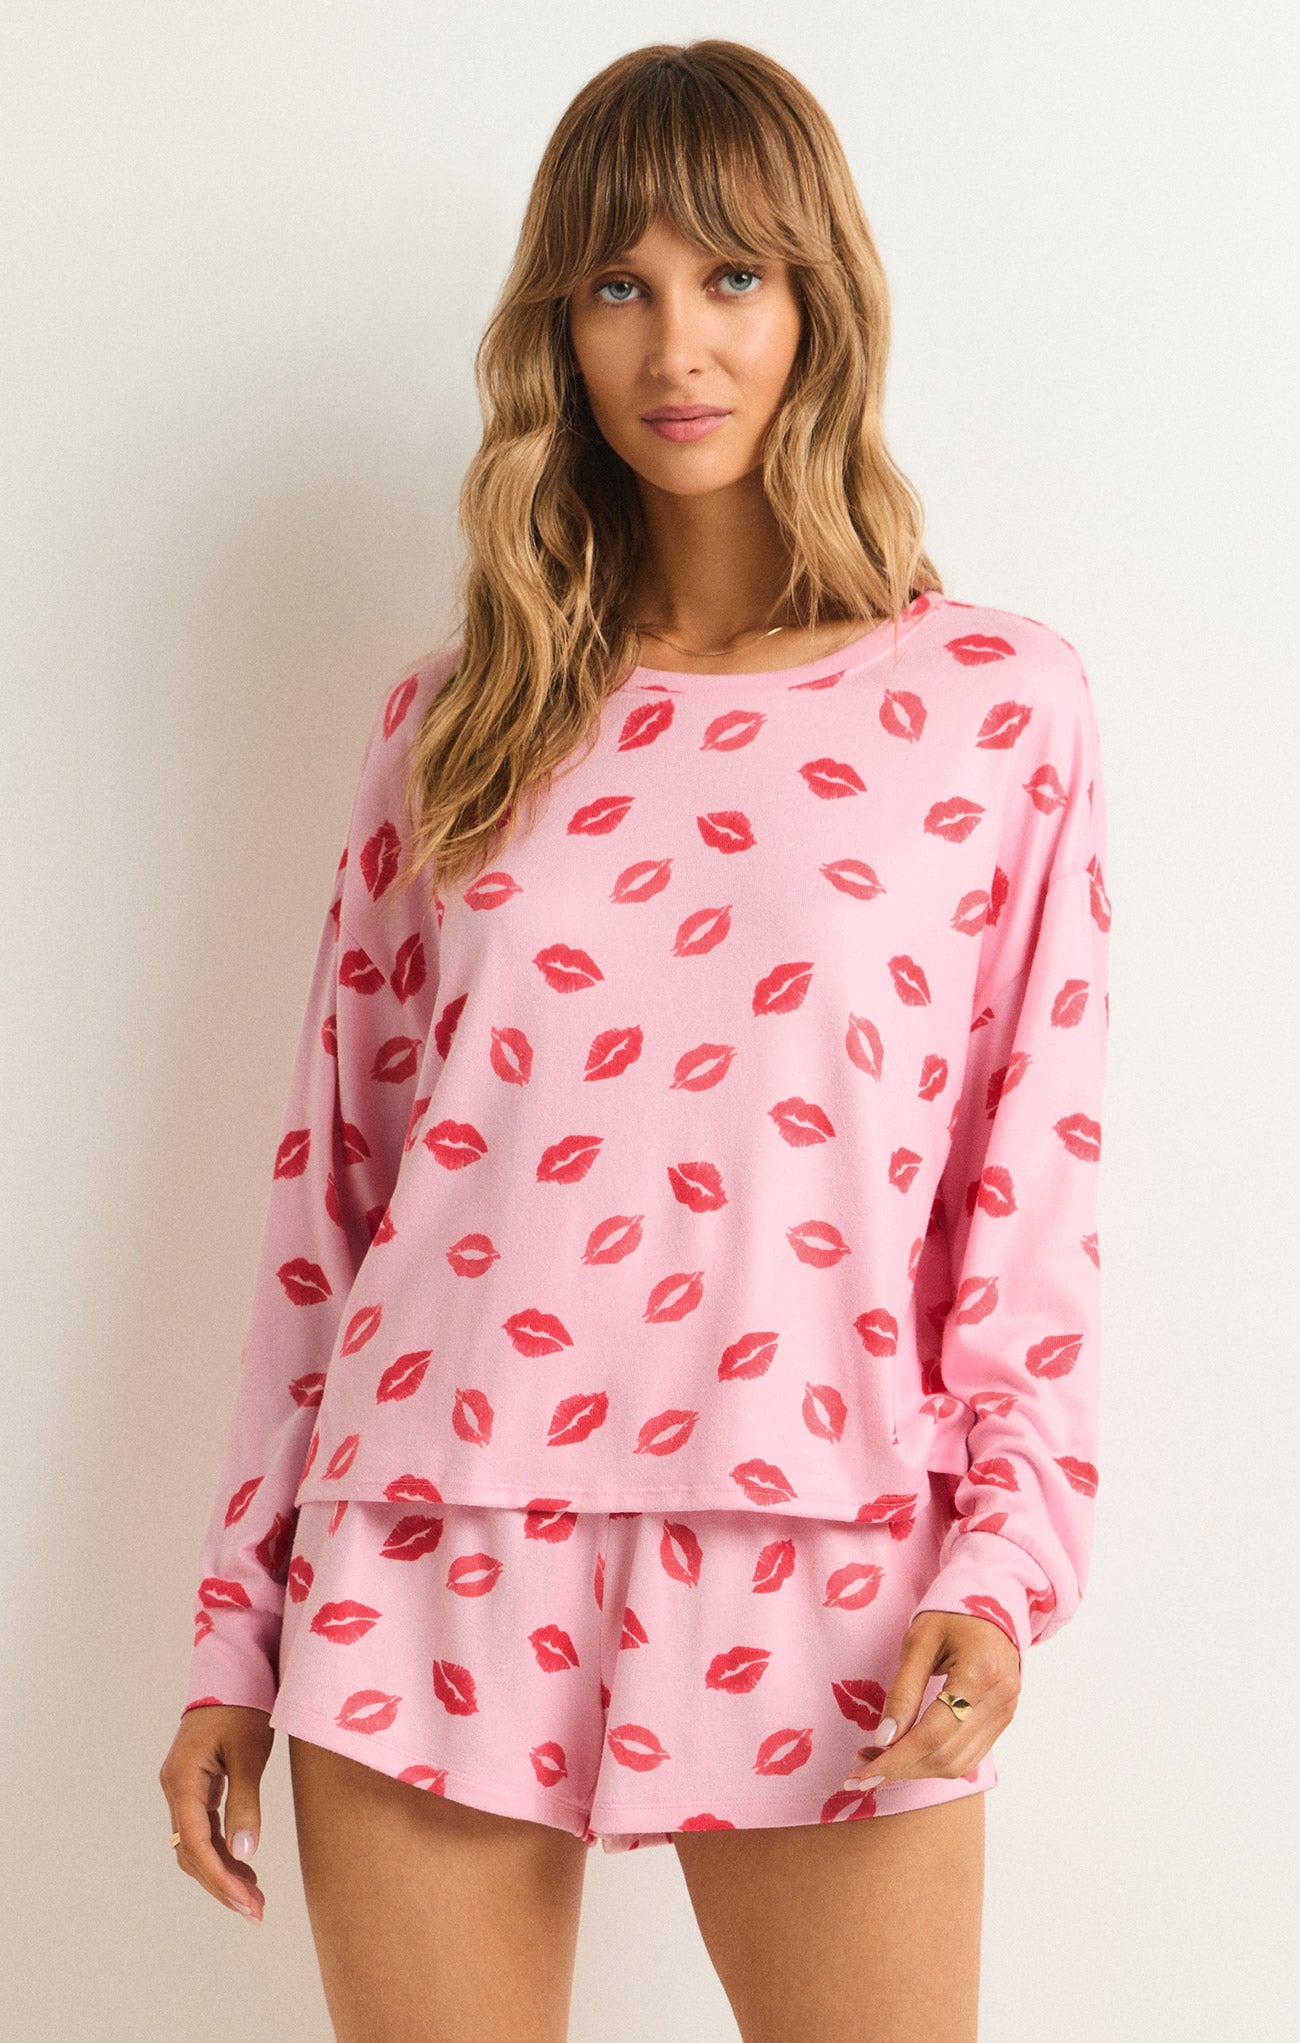 Pucker Up Kisses Long Sleeve Top – Z SUPPLY